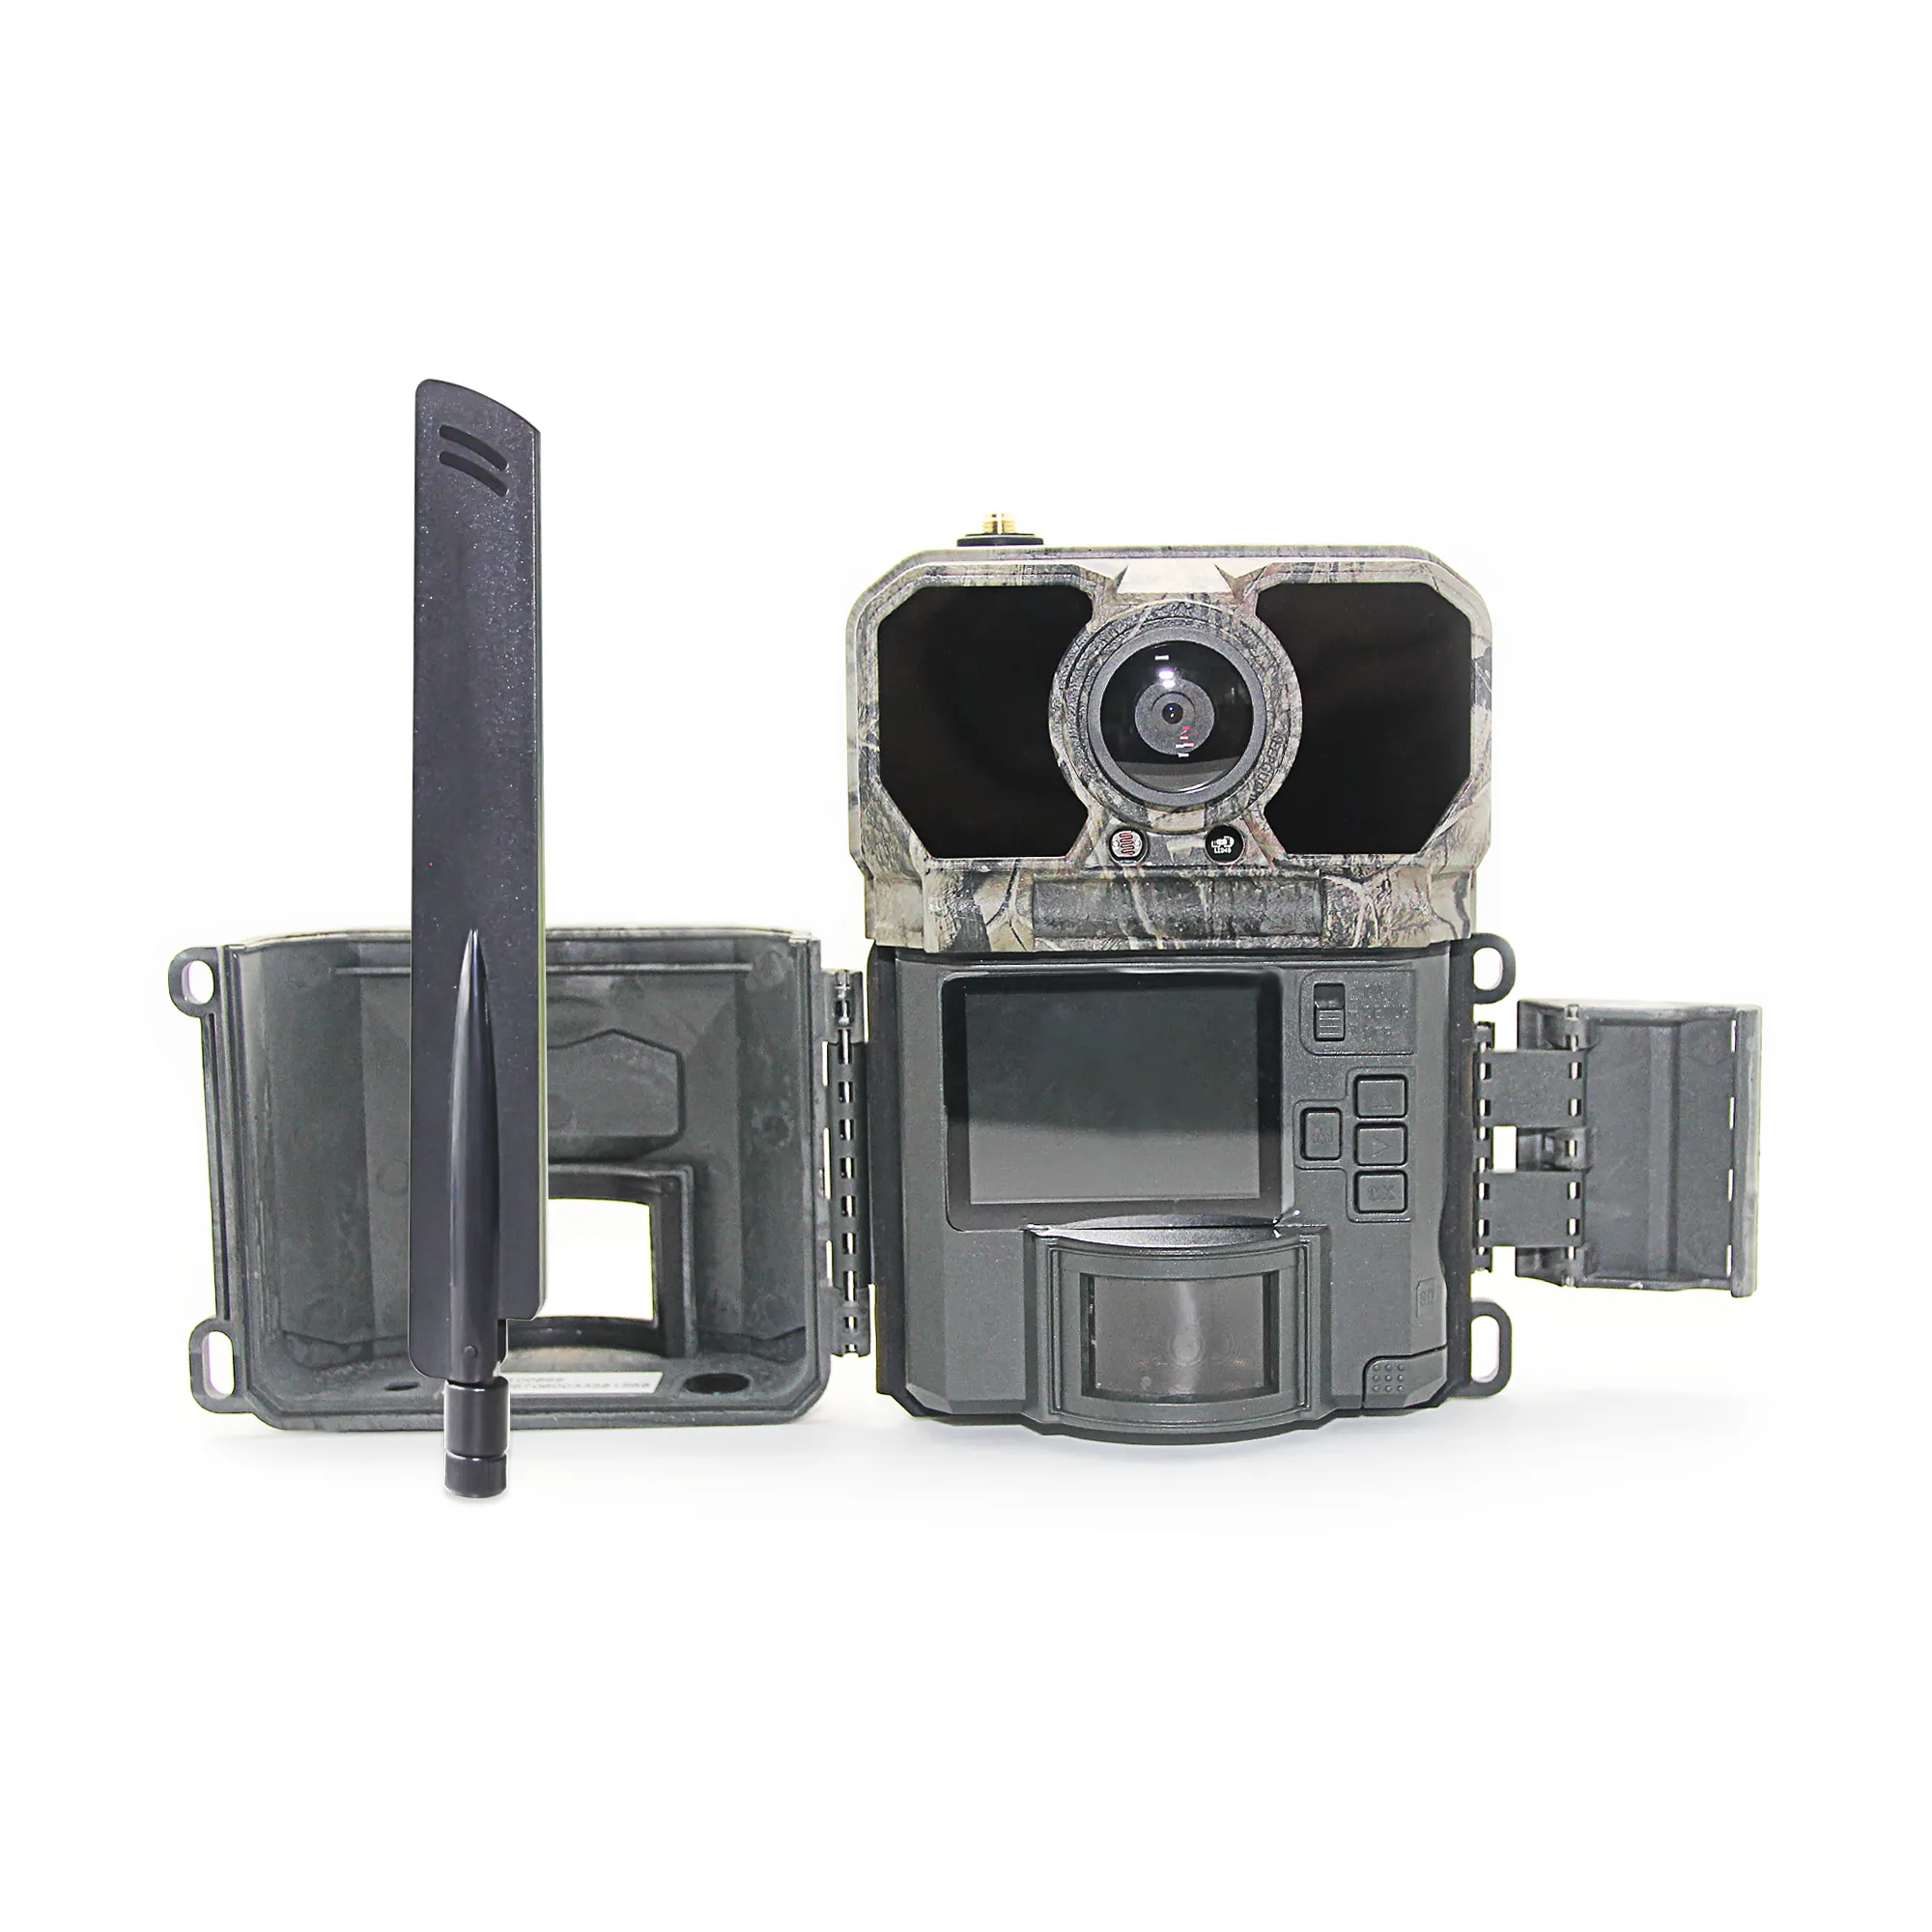 Trail Camera 4g 4G LTE Wireless GPRS 1080P 30MP No Glow 850nm IR LEDs App Control Remotely Trail Hunting Scouting Camera